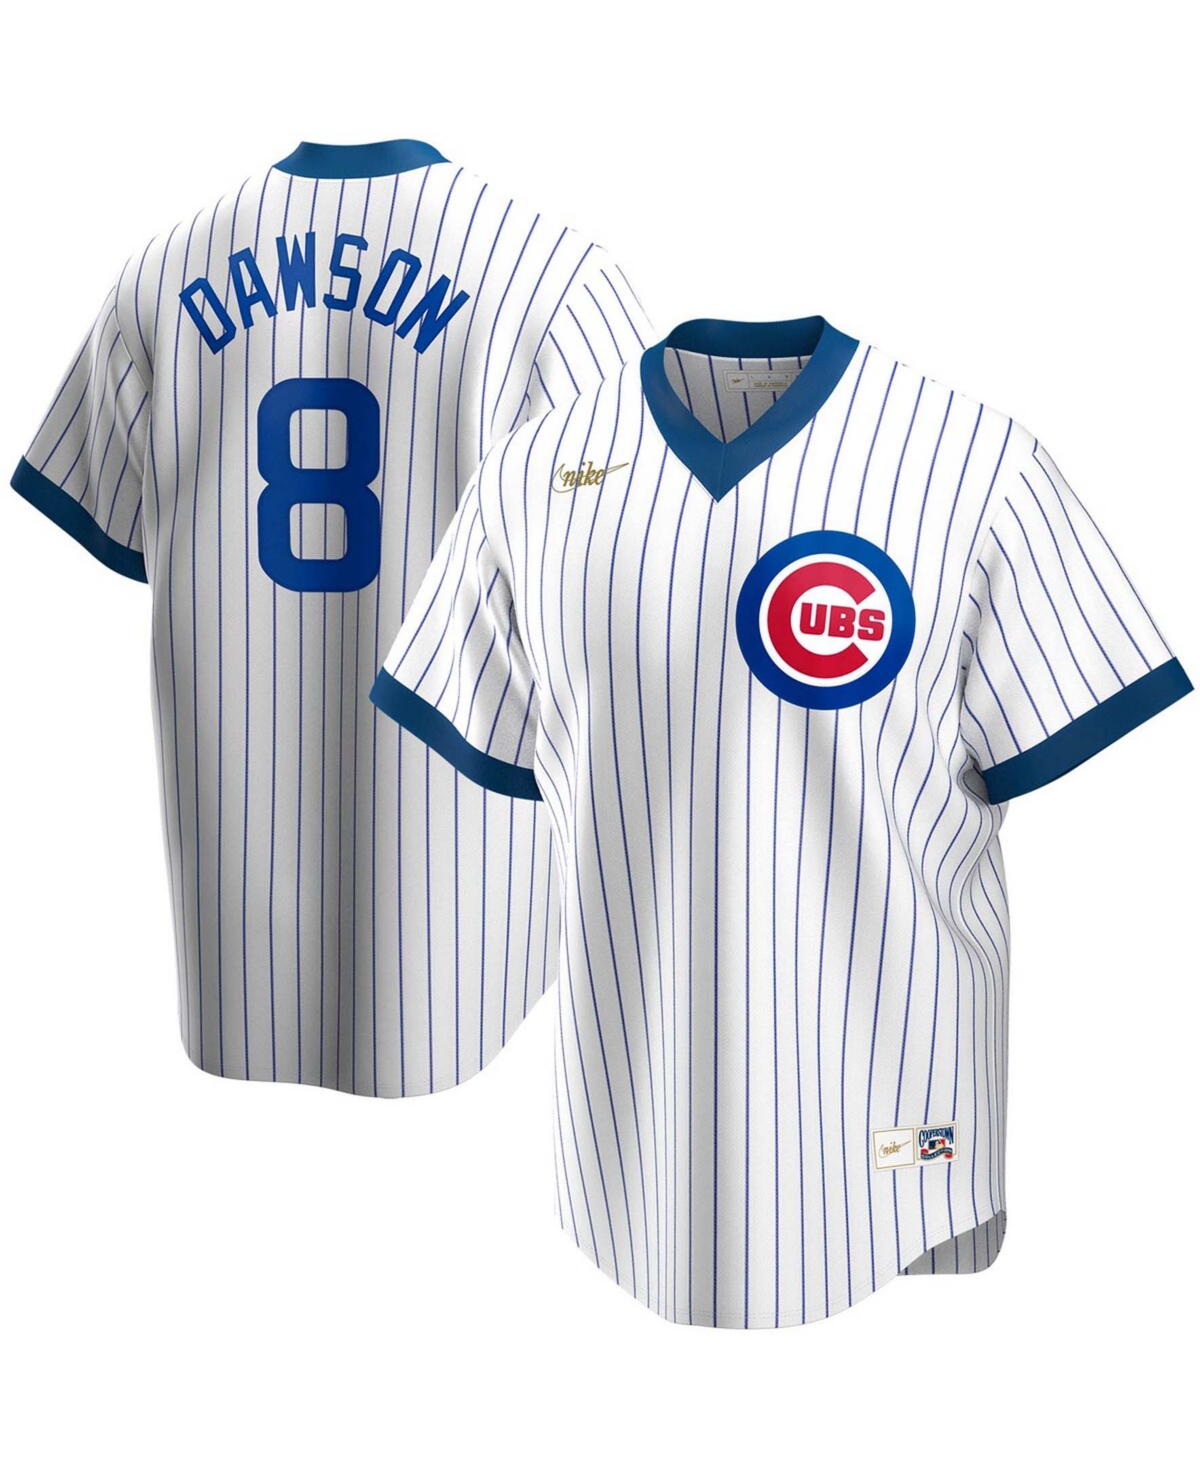 Men's Nike White Chicago Cubs Home Cooperstown Collection Team Jersey 